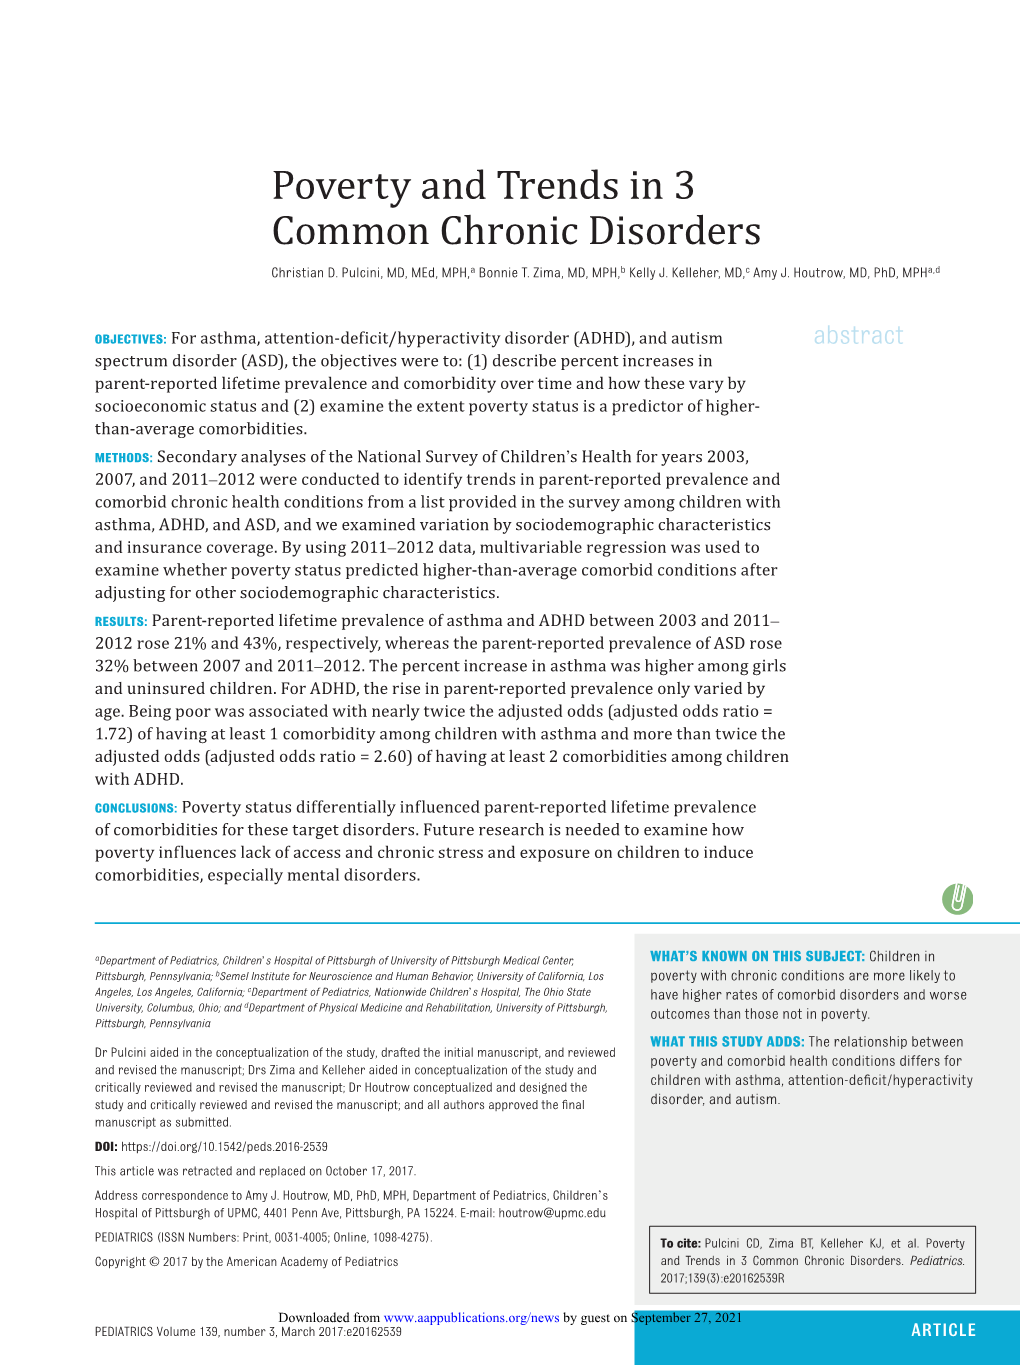 Poverty and Trends in 3 Common Chronic Disorders 3 139 Pediatrics 2017 ROUGH GALLEY PROOF –